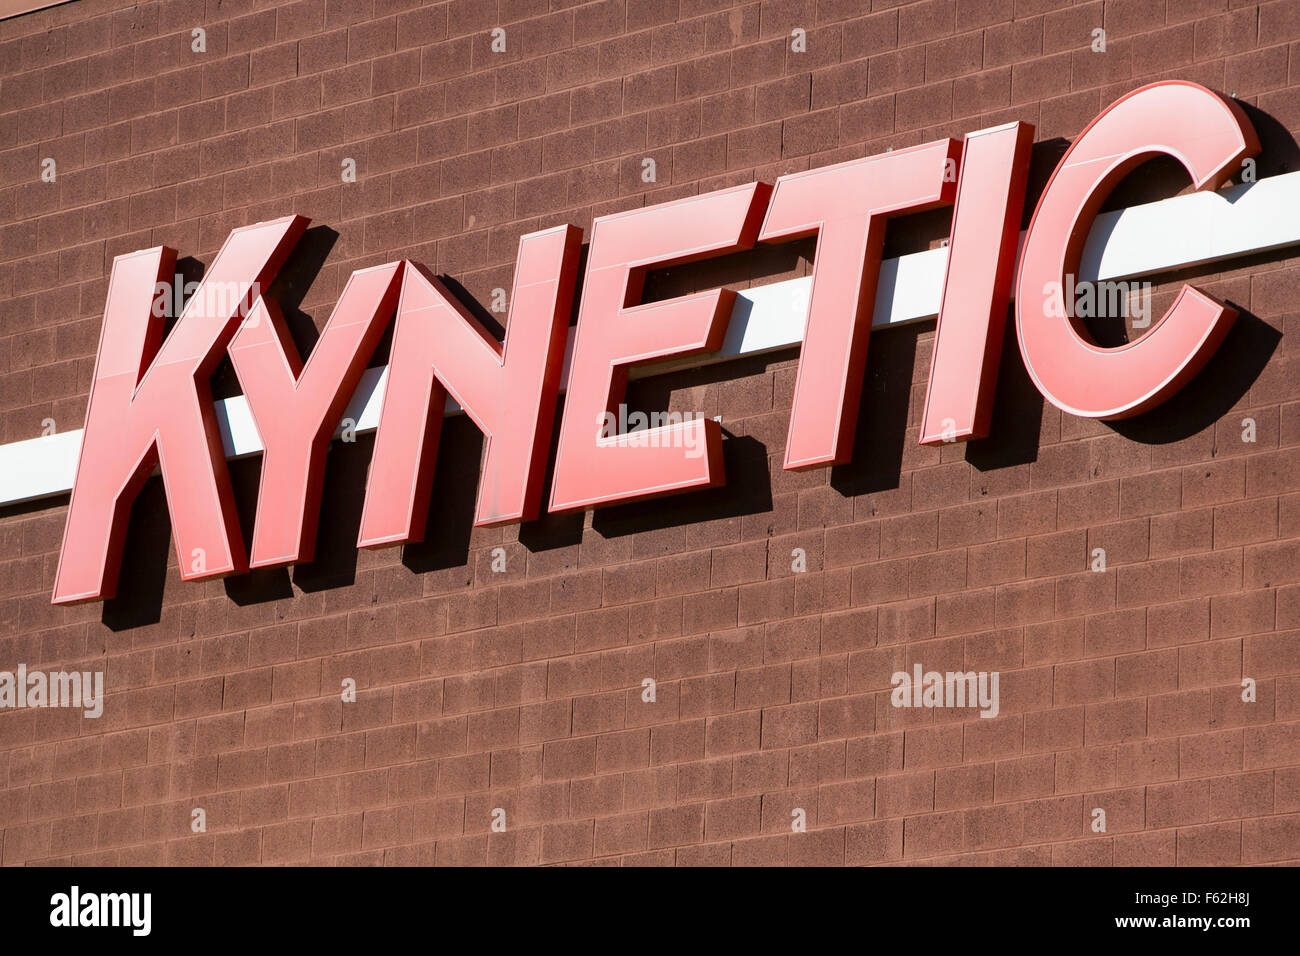 A logo sign outside of the headquarters of Kynetic, the parent company of Fanatics, Shoprunner and Rue La La, in Conshohocken, P Stock Photo